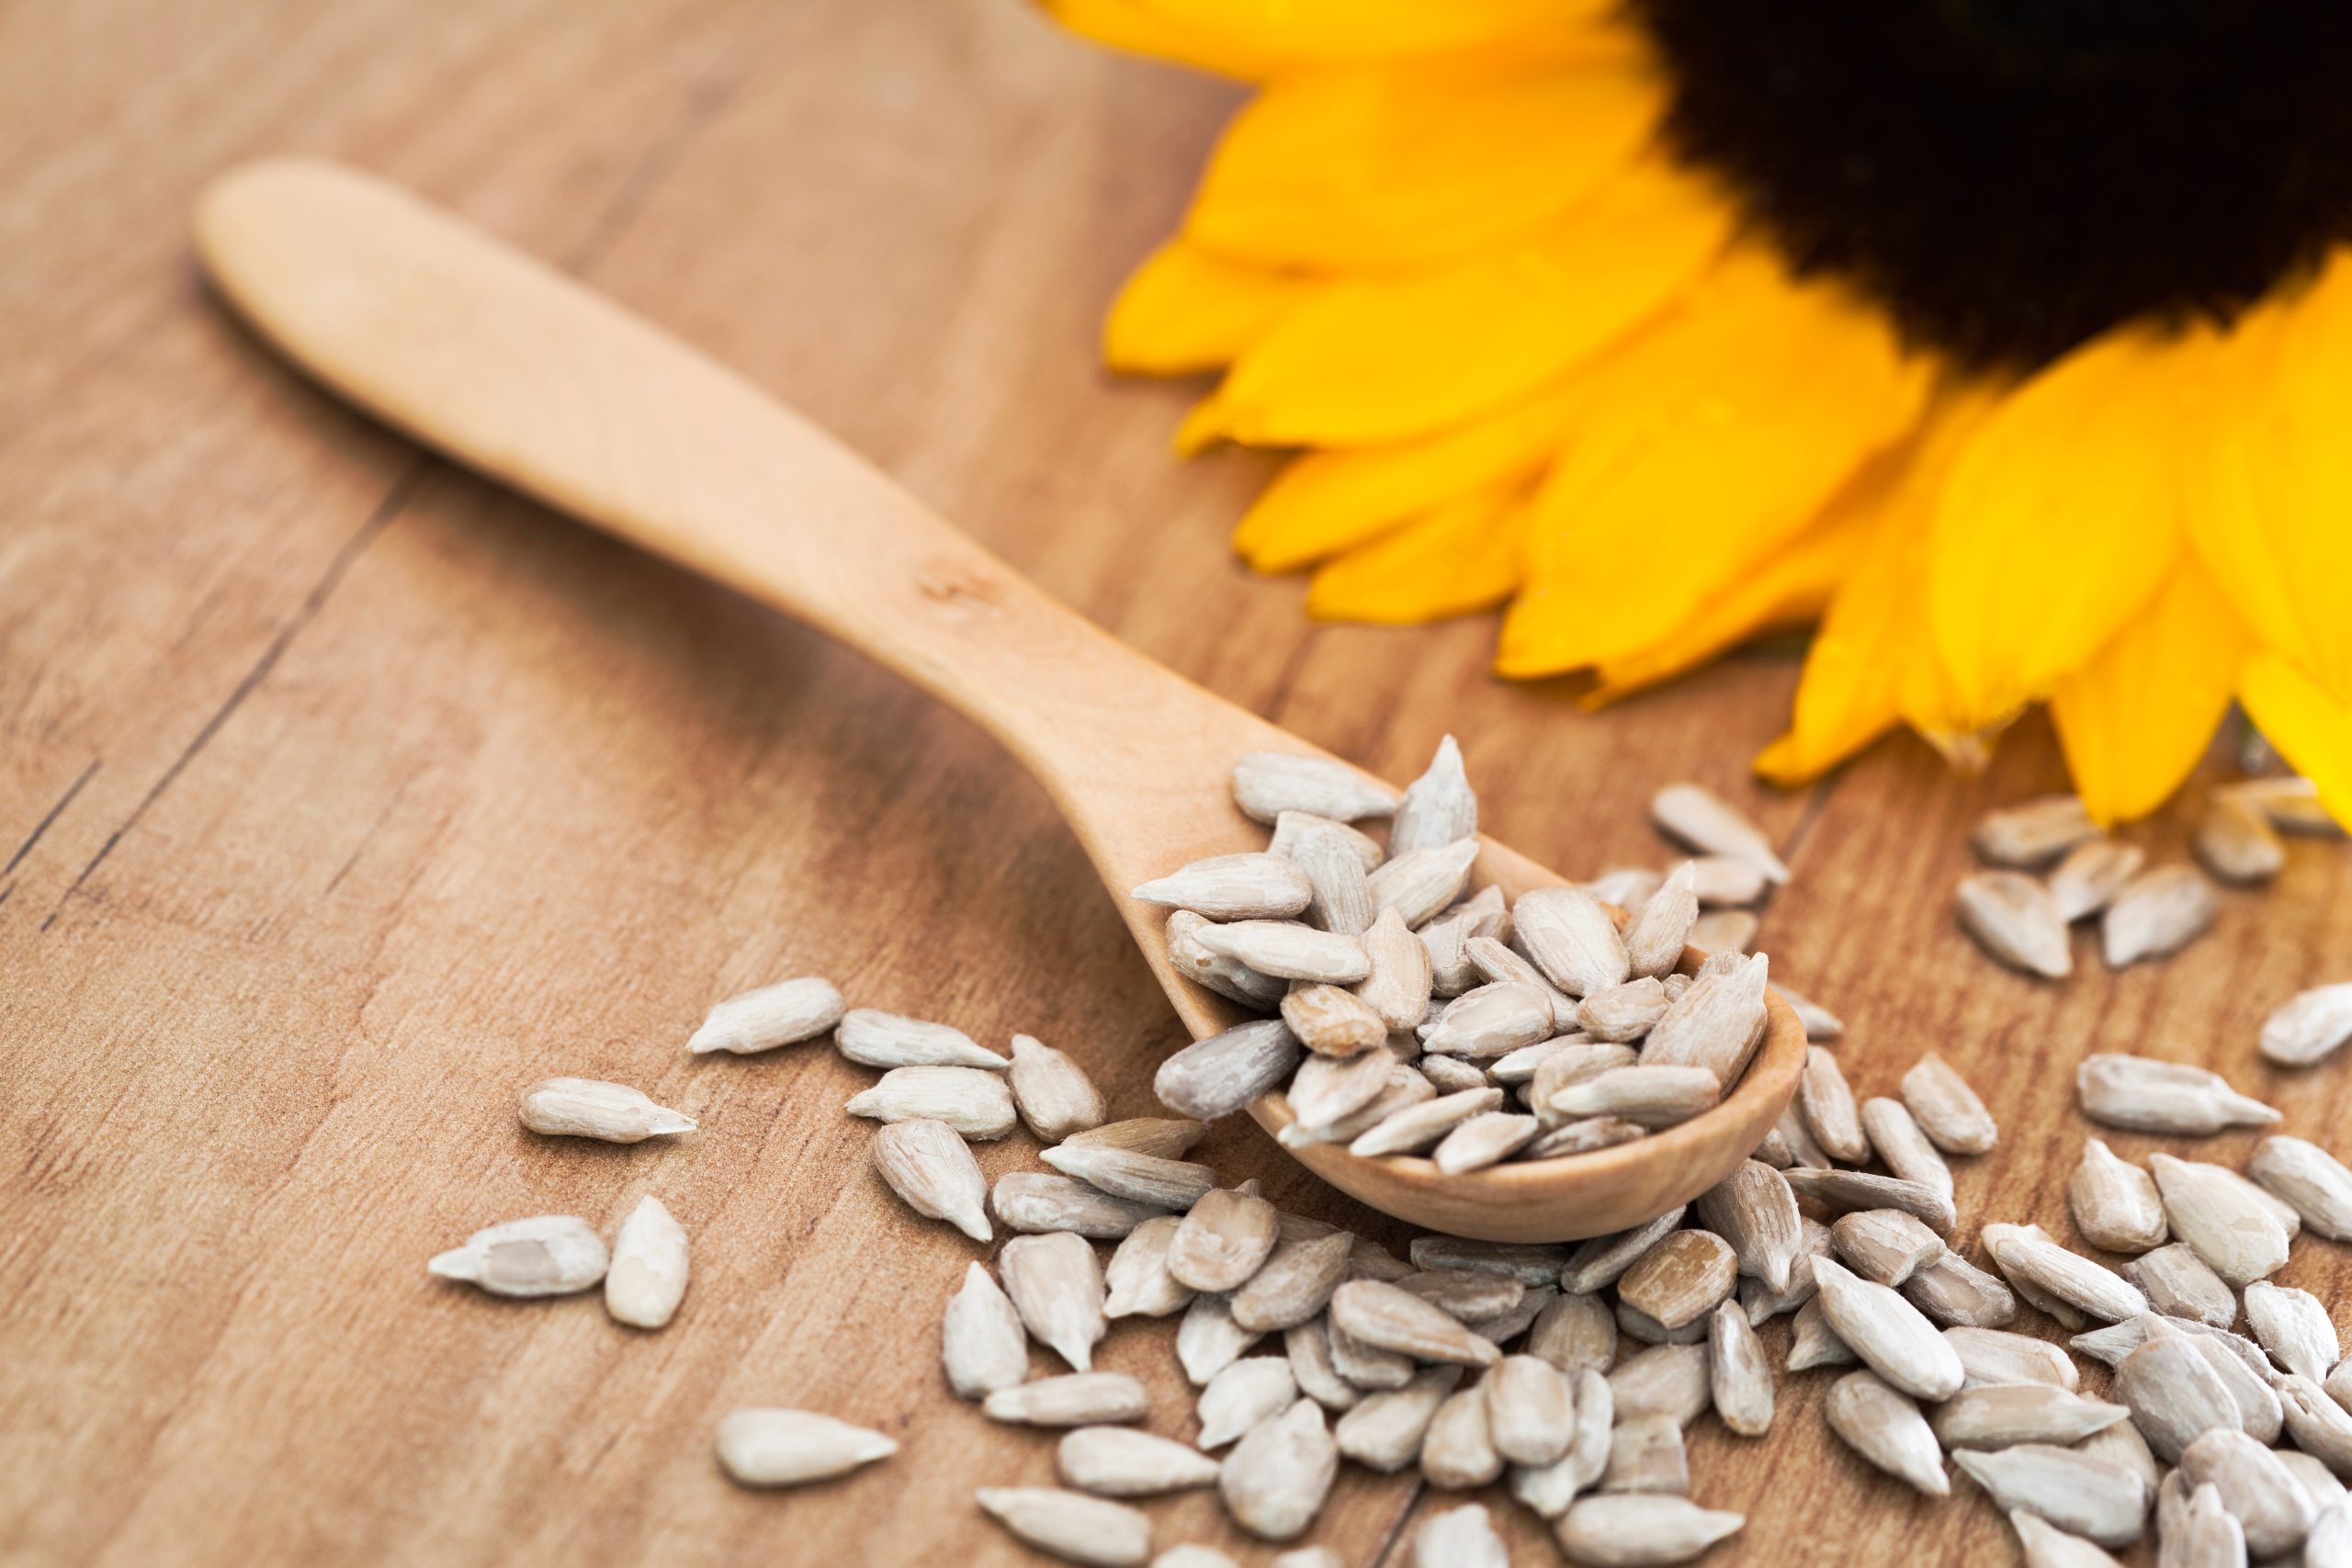 Sunflower,Seed,With,A,Wooden,Spoon.